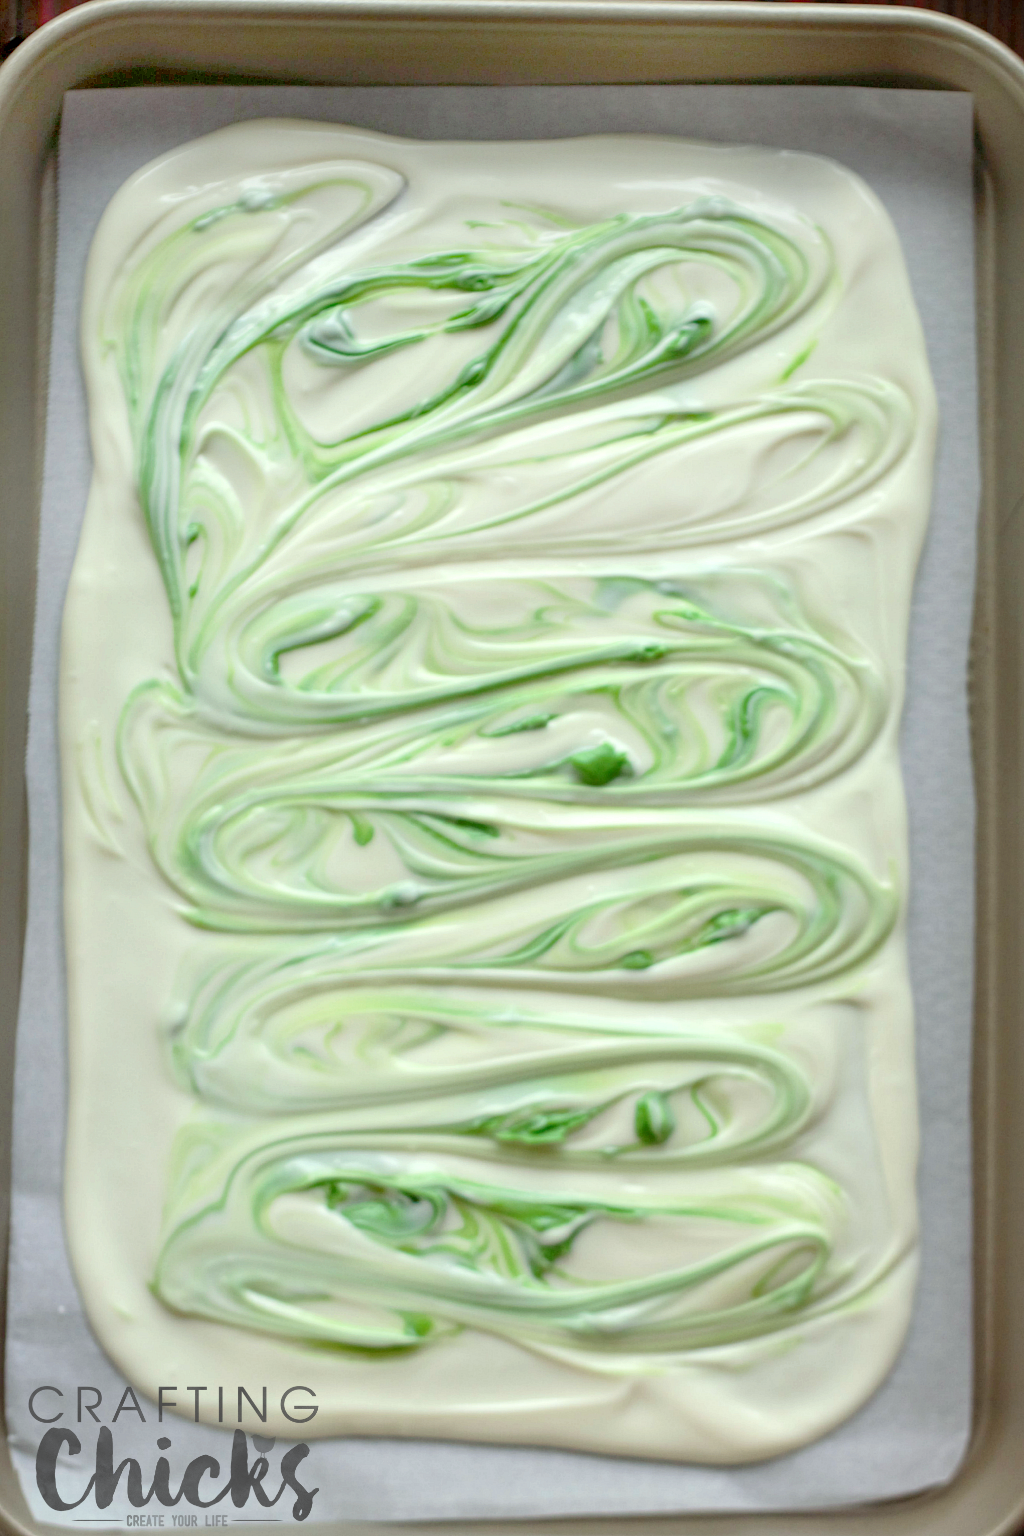 Carrot Cake Easter Bark gets a swirl from melted green chocolate ... get ready for sprinkles!